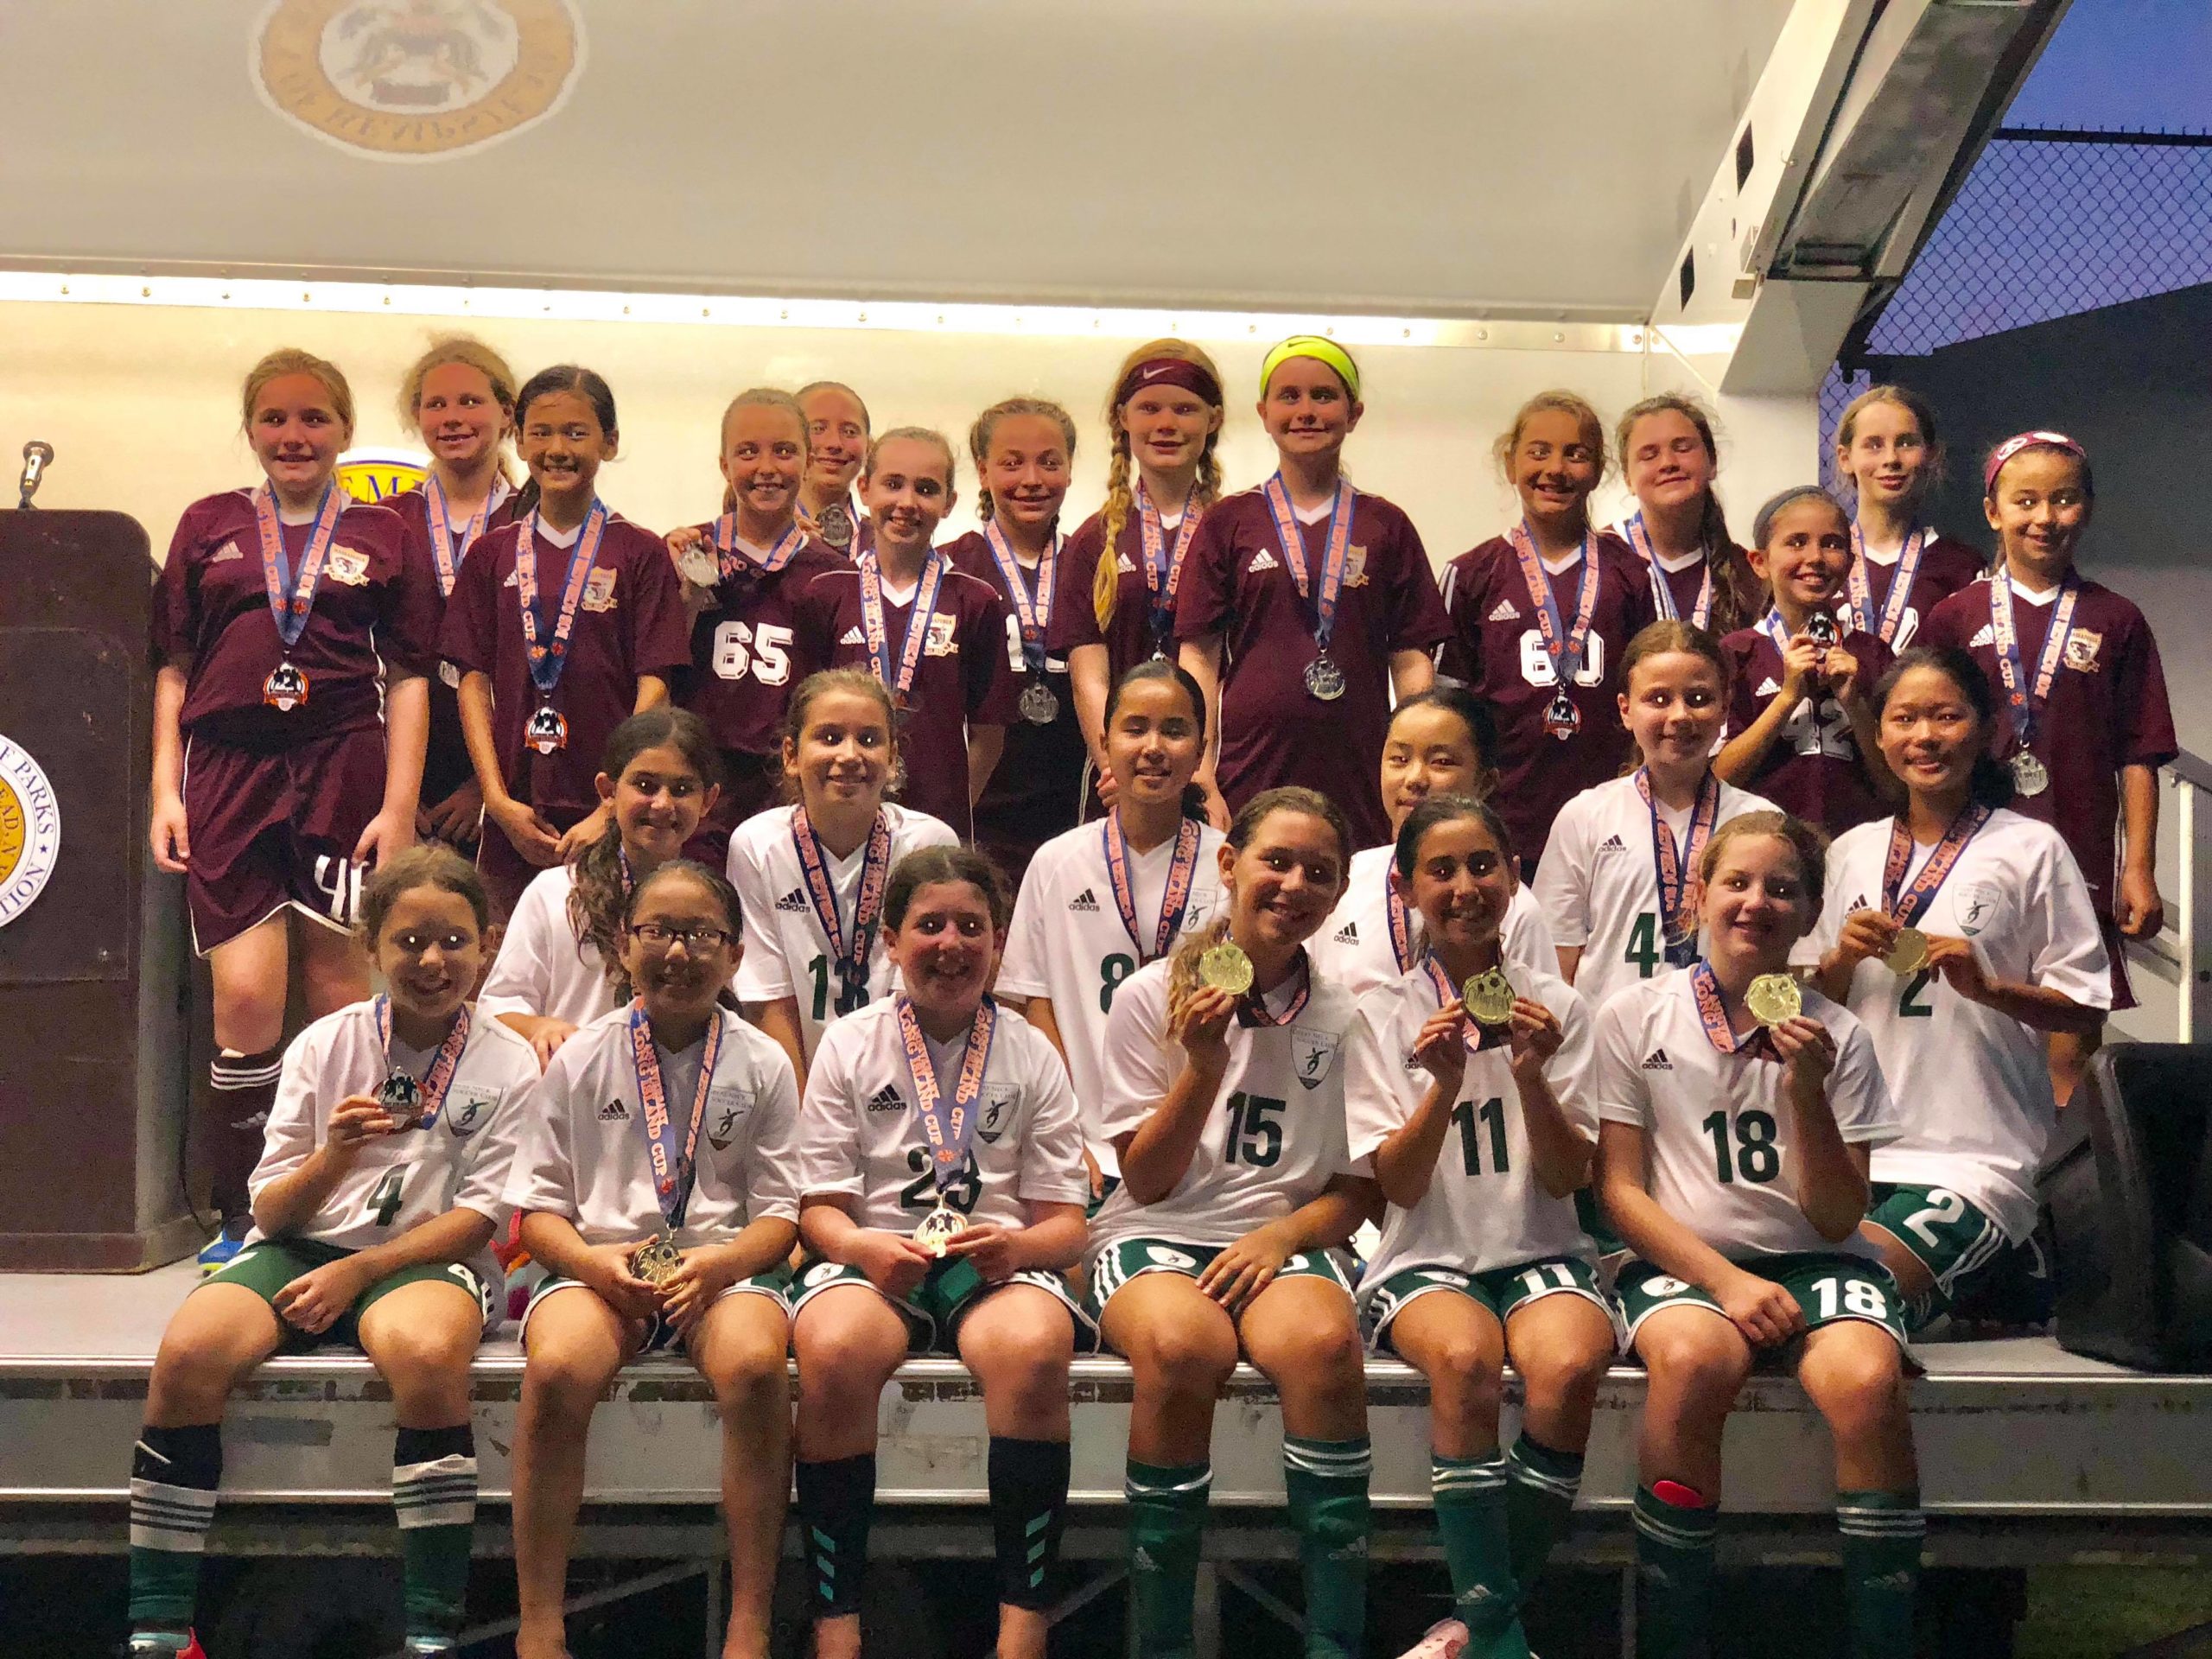 The Great Neck Green Storm took home gold on Sunday. (Photo courtesy of Melissa Zargari)